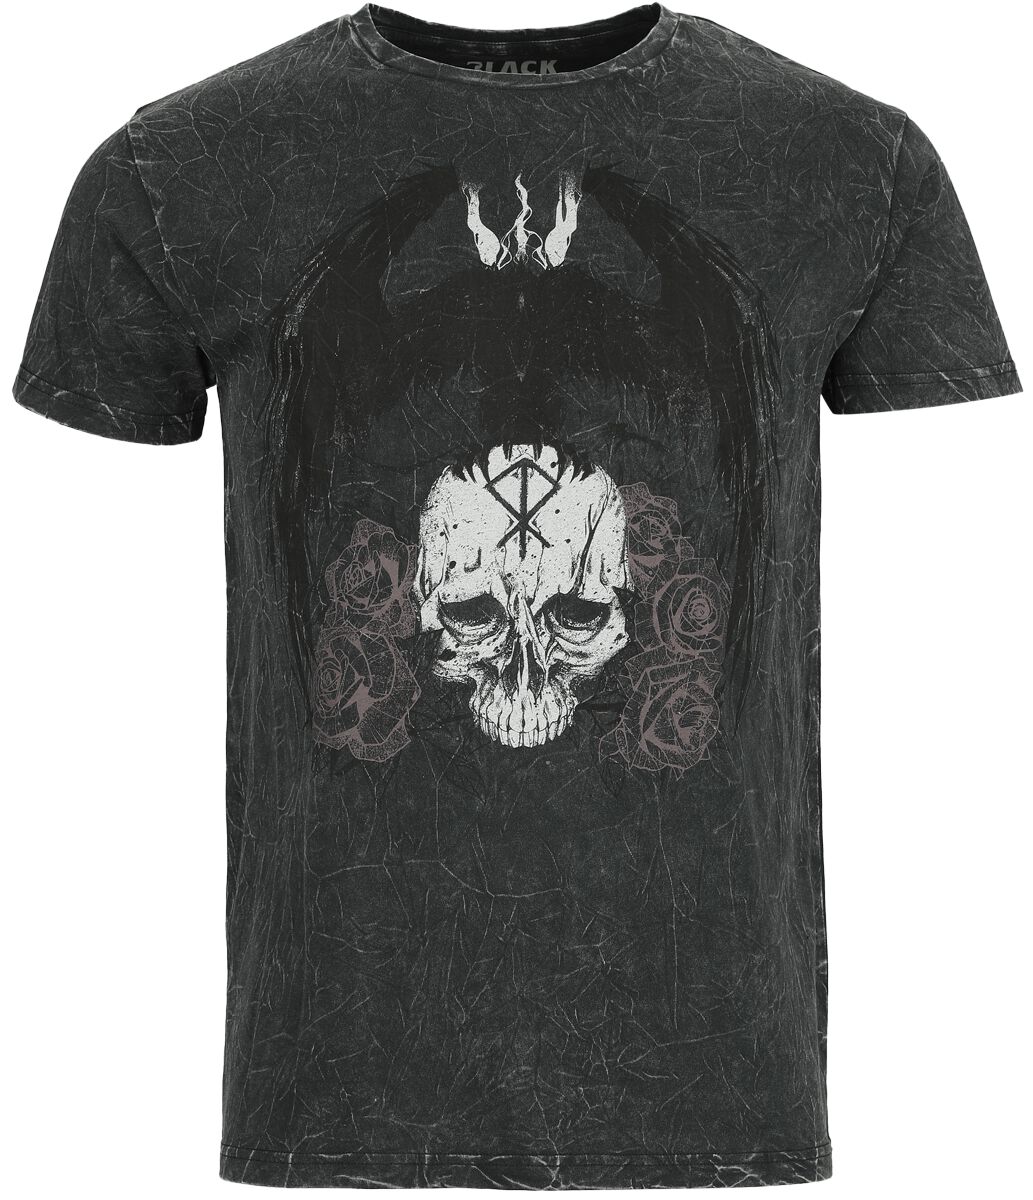 Image of T-Shirt di Black Premium by EMP - Black washed t-shirt with skull and crown print - S a XL - Uomo - grigio